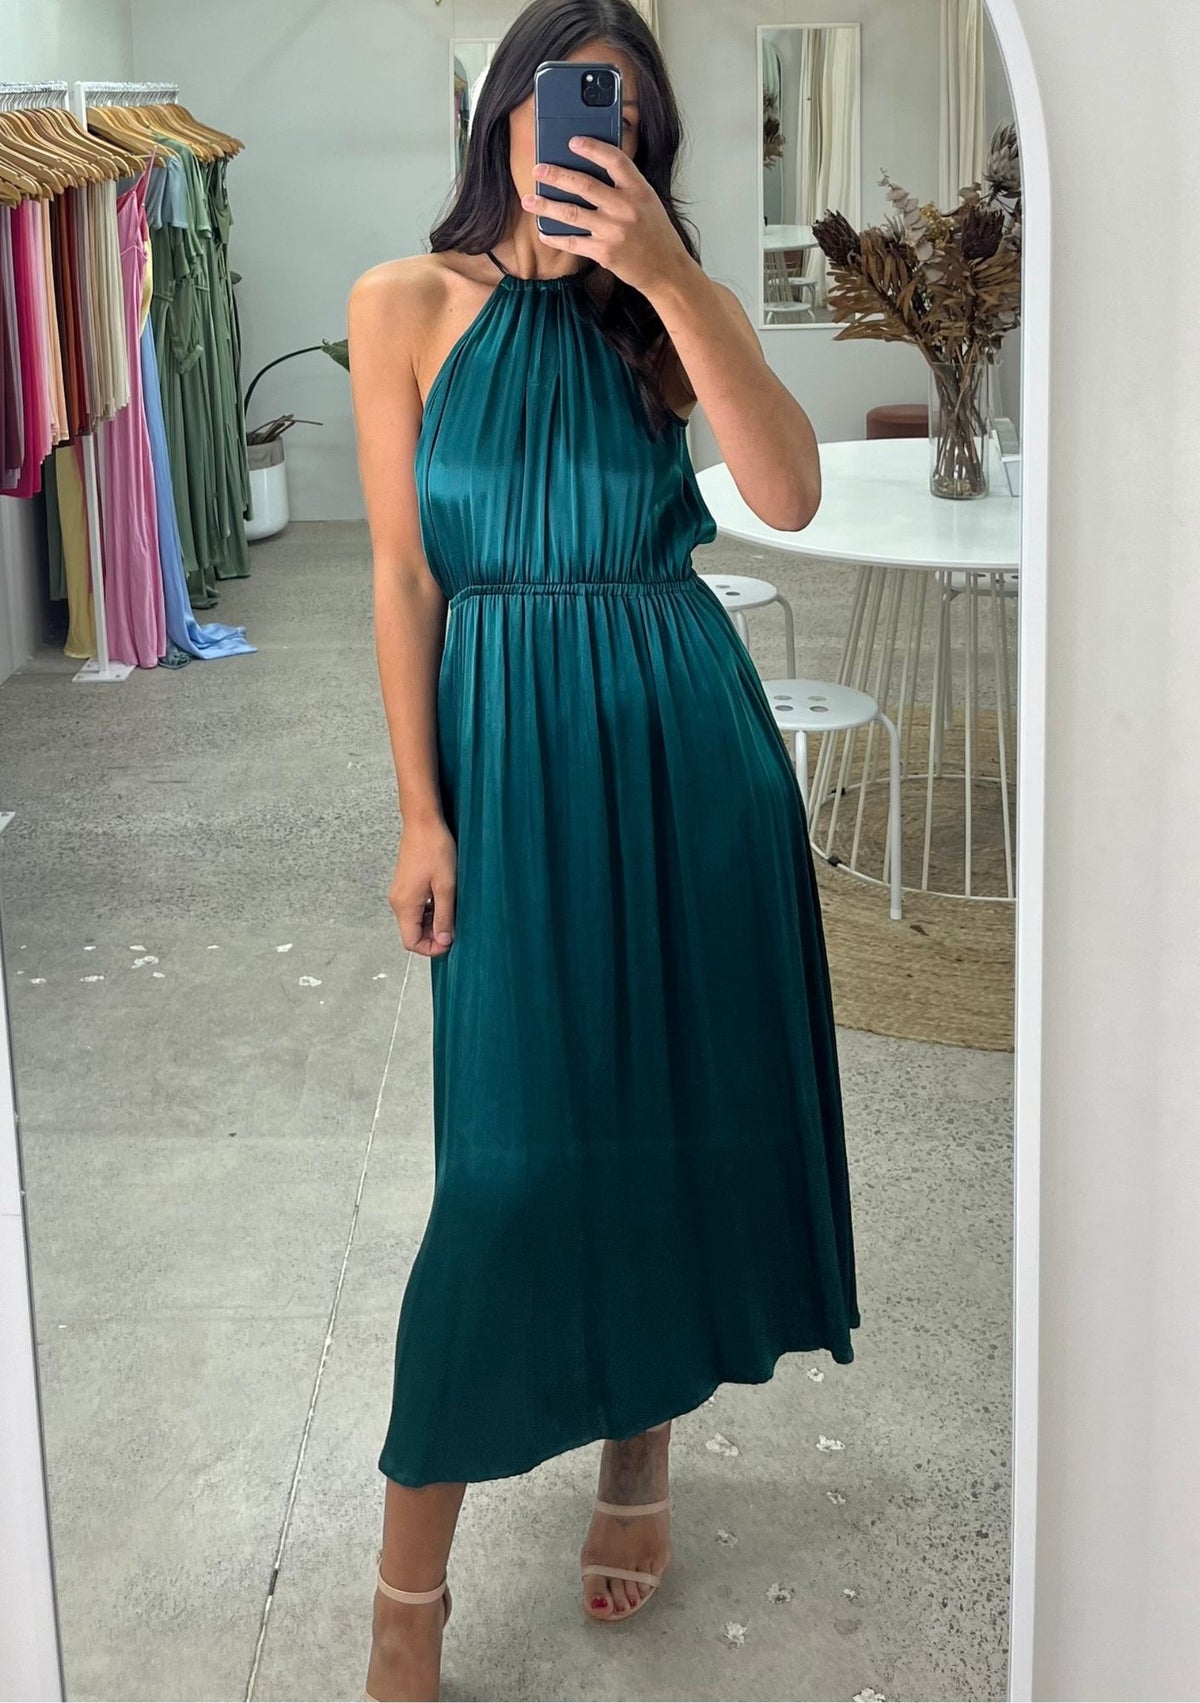 Tokyo Dress - Photographed in Emerald Green Satin